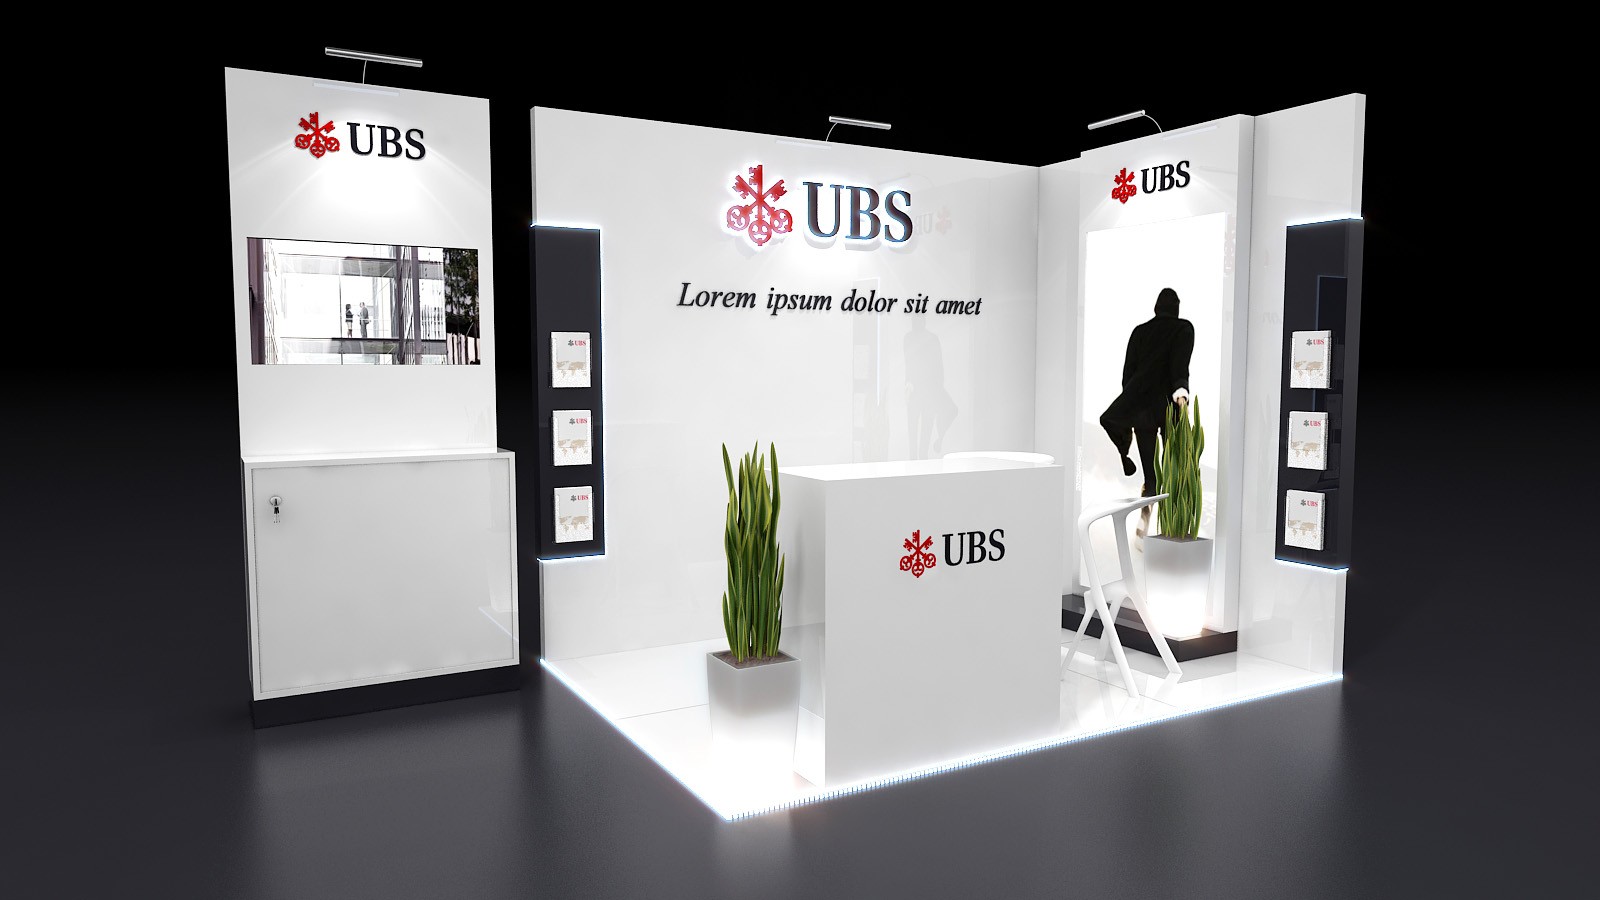 exhibition stands